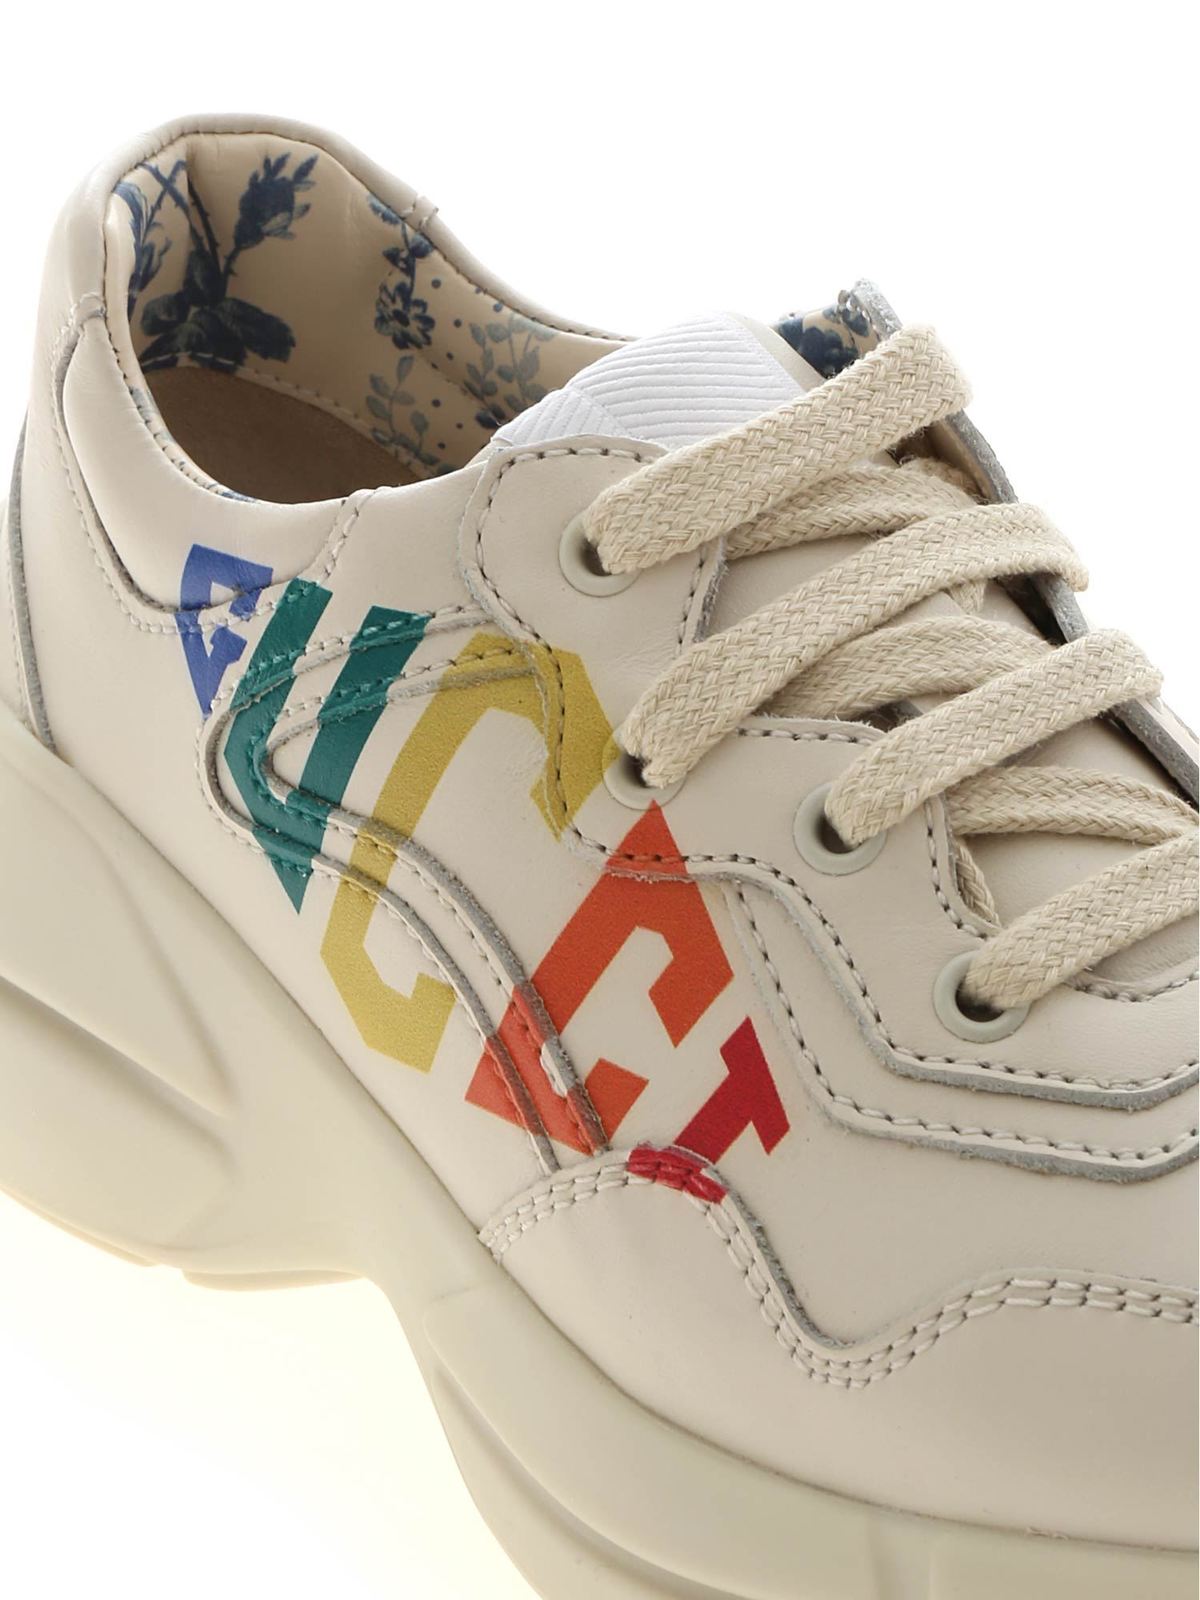 Trainers Gucci - Rhyton Gucci sneakersin ivory color - 612996DRW009022